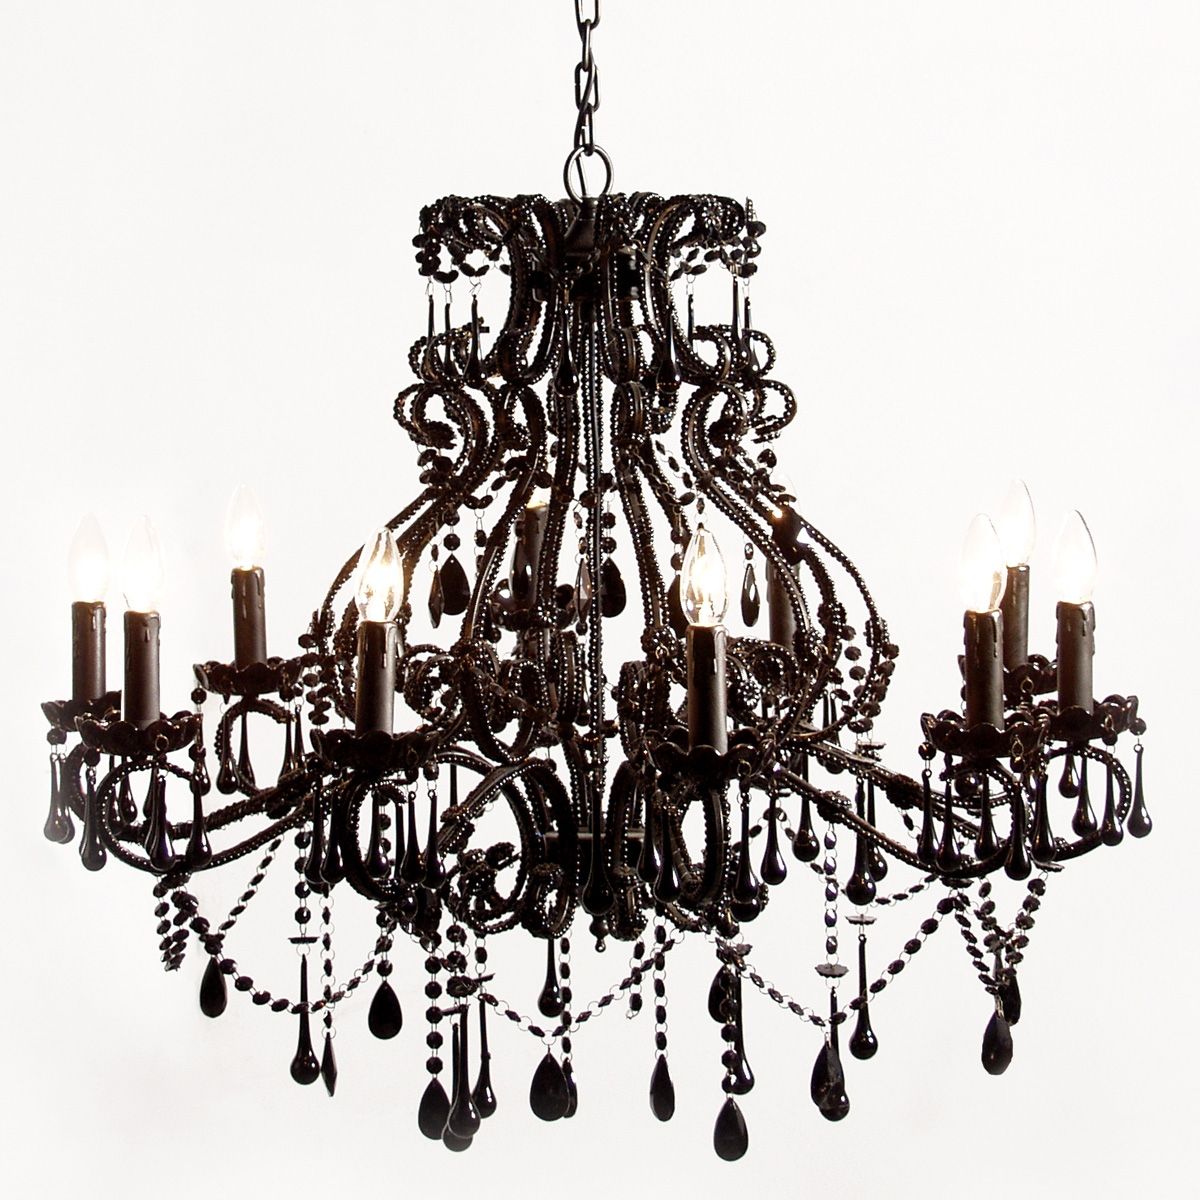 Unique Black Chandelier For Bedroom Lighting Courtagerivegauche With Vintage Black Chandelier (View 4 of 15)